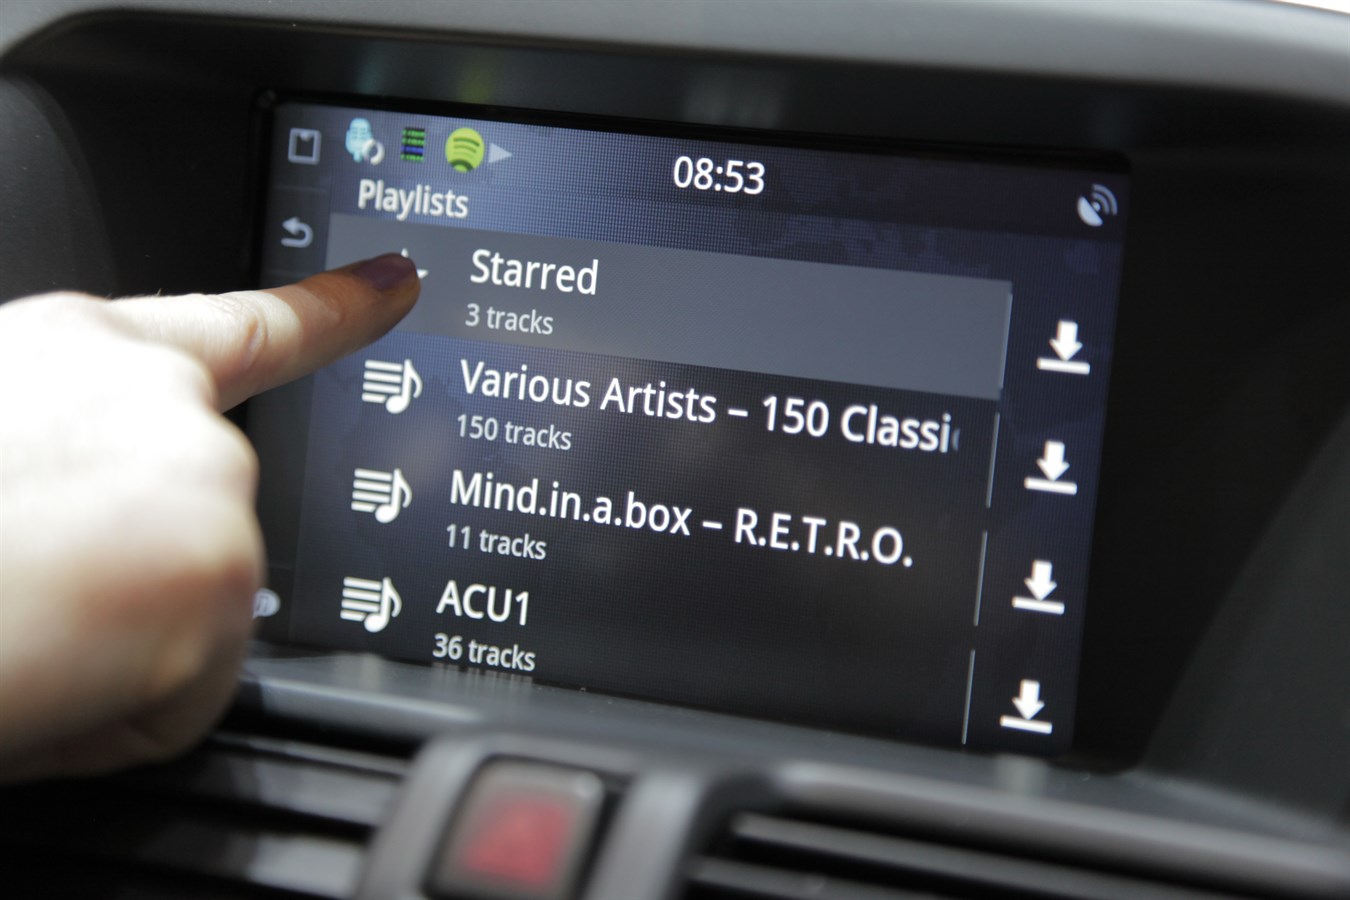 Volvo Car launches world-first in-dash, voice-activated Spotify through Sensus Connected Touch